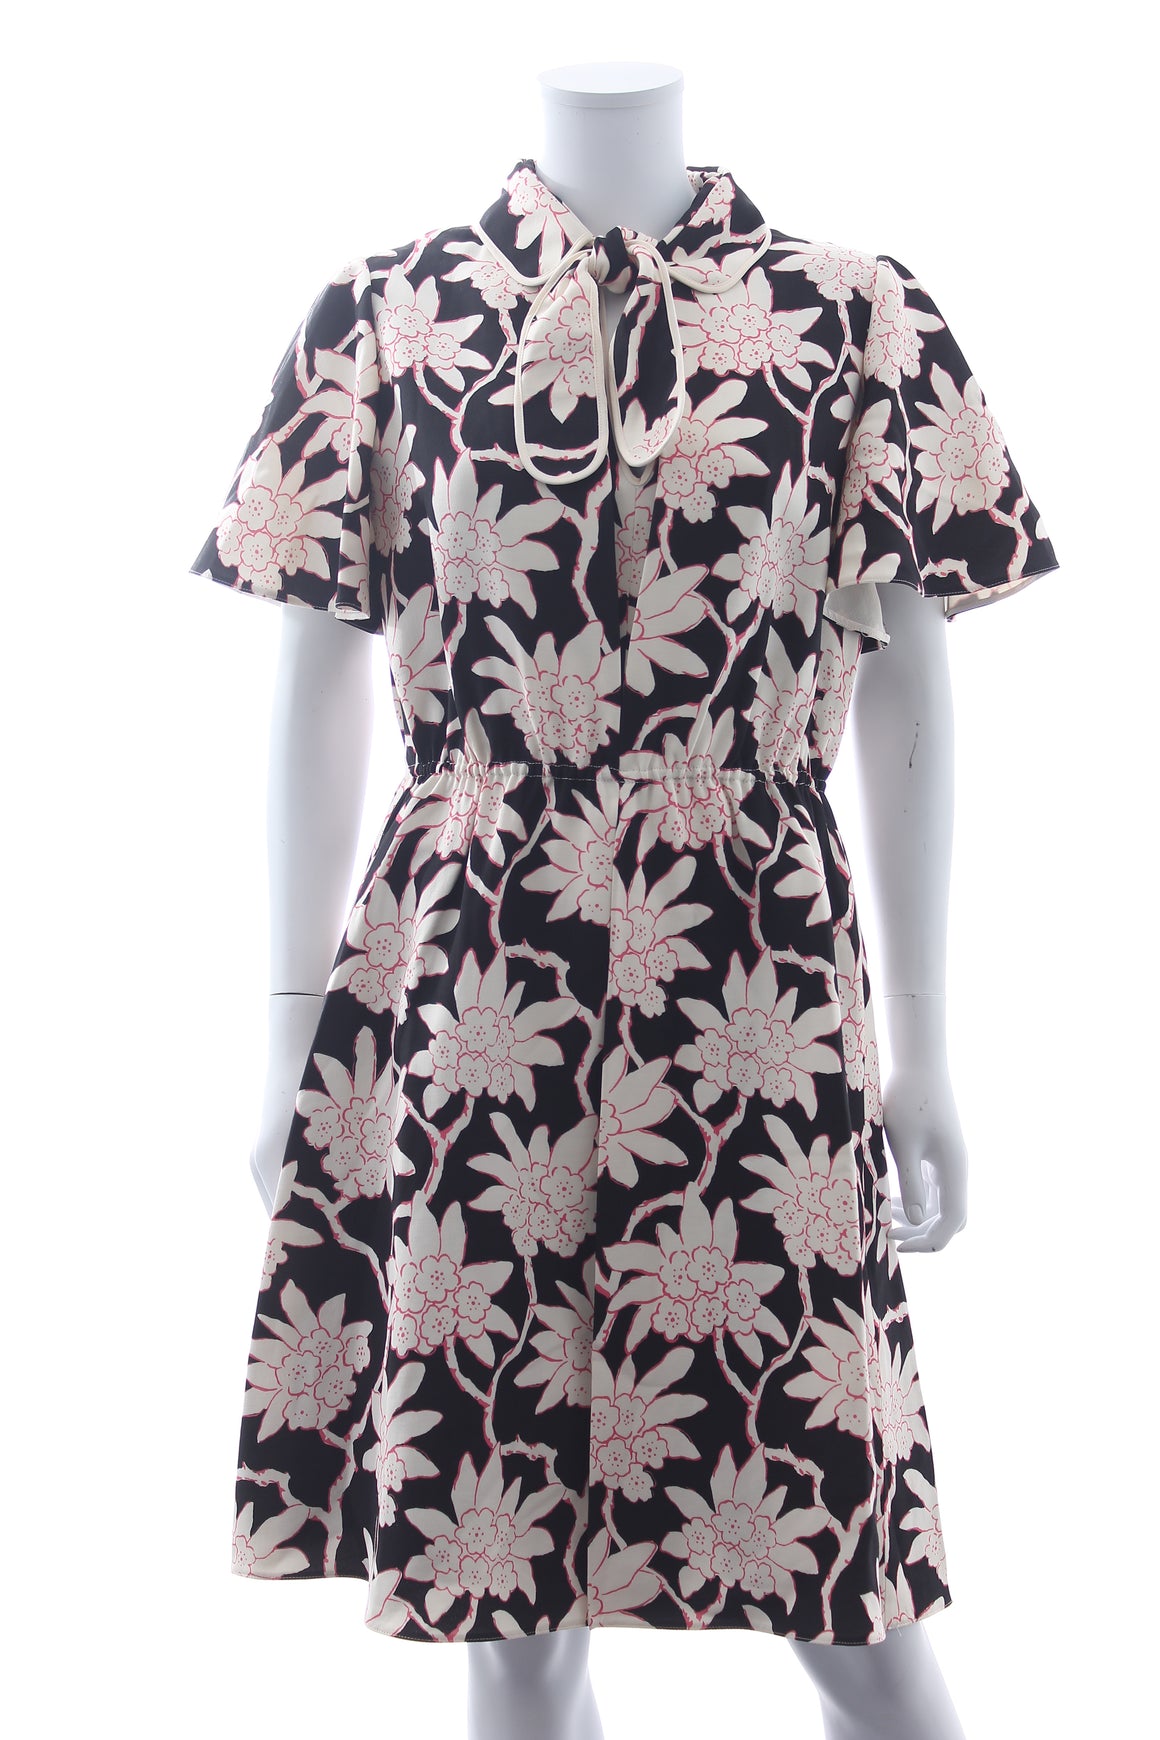 Valentino Floral Printed Wool and Silk-Blend Dress